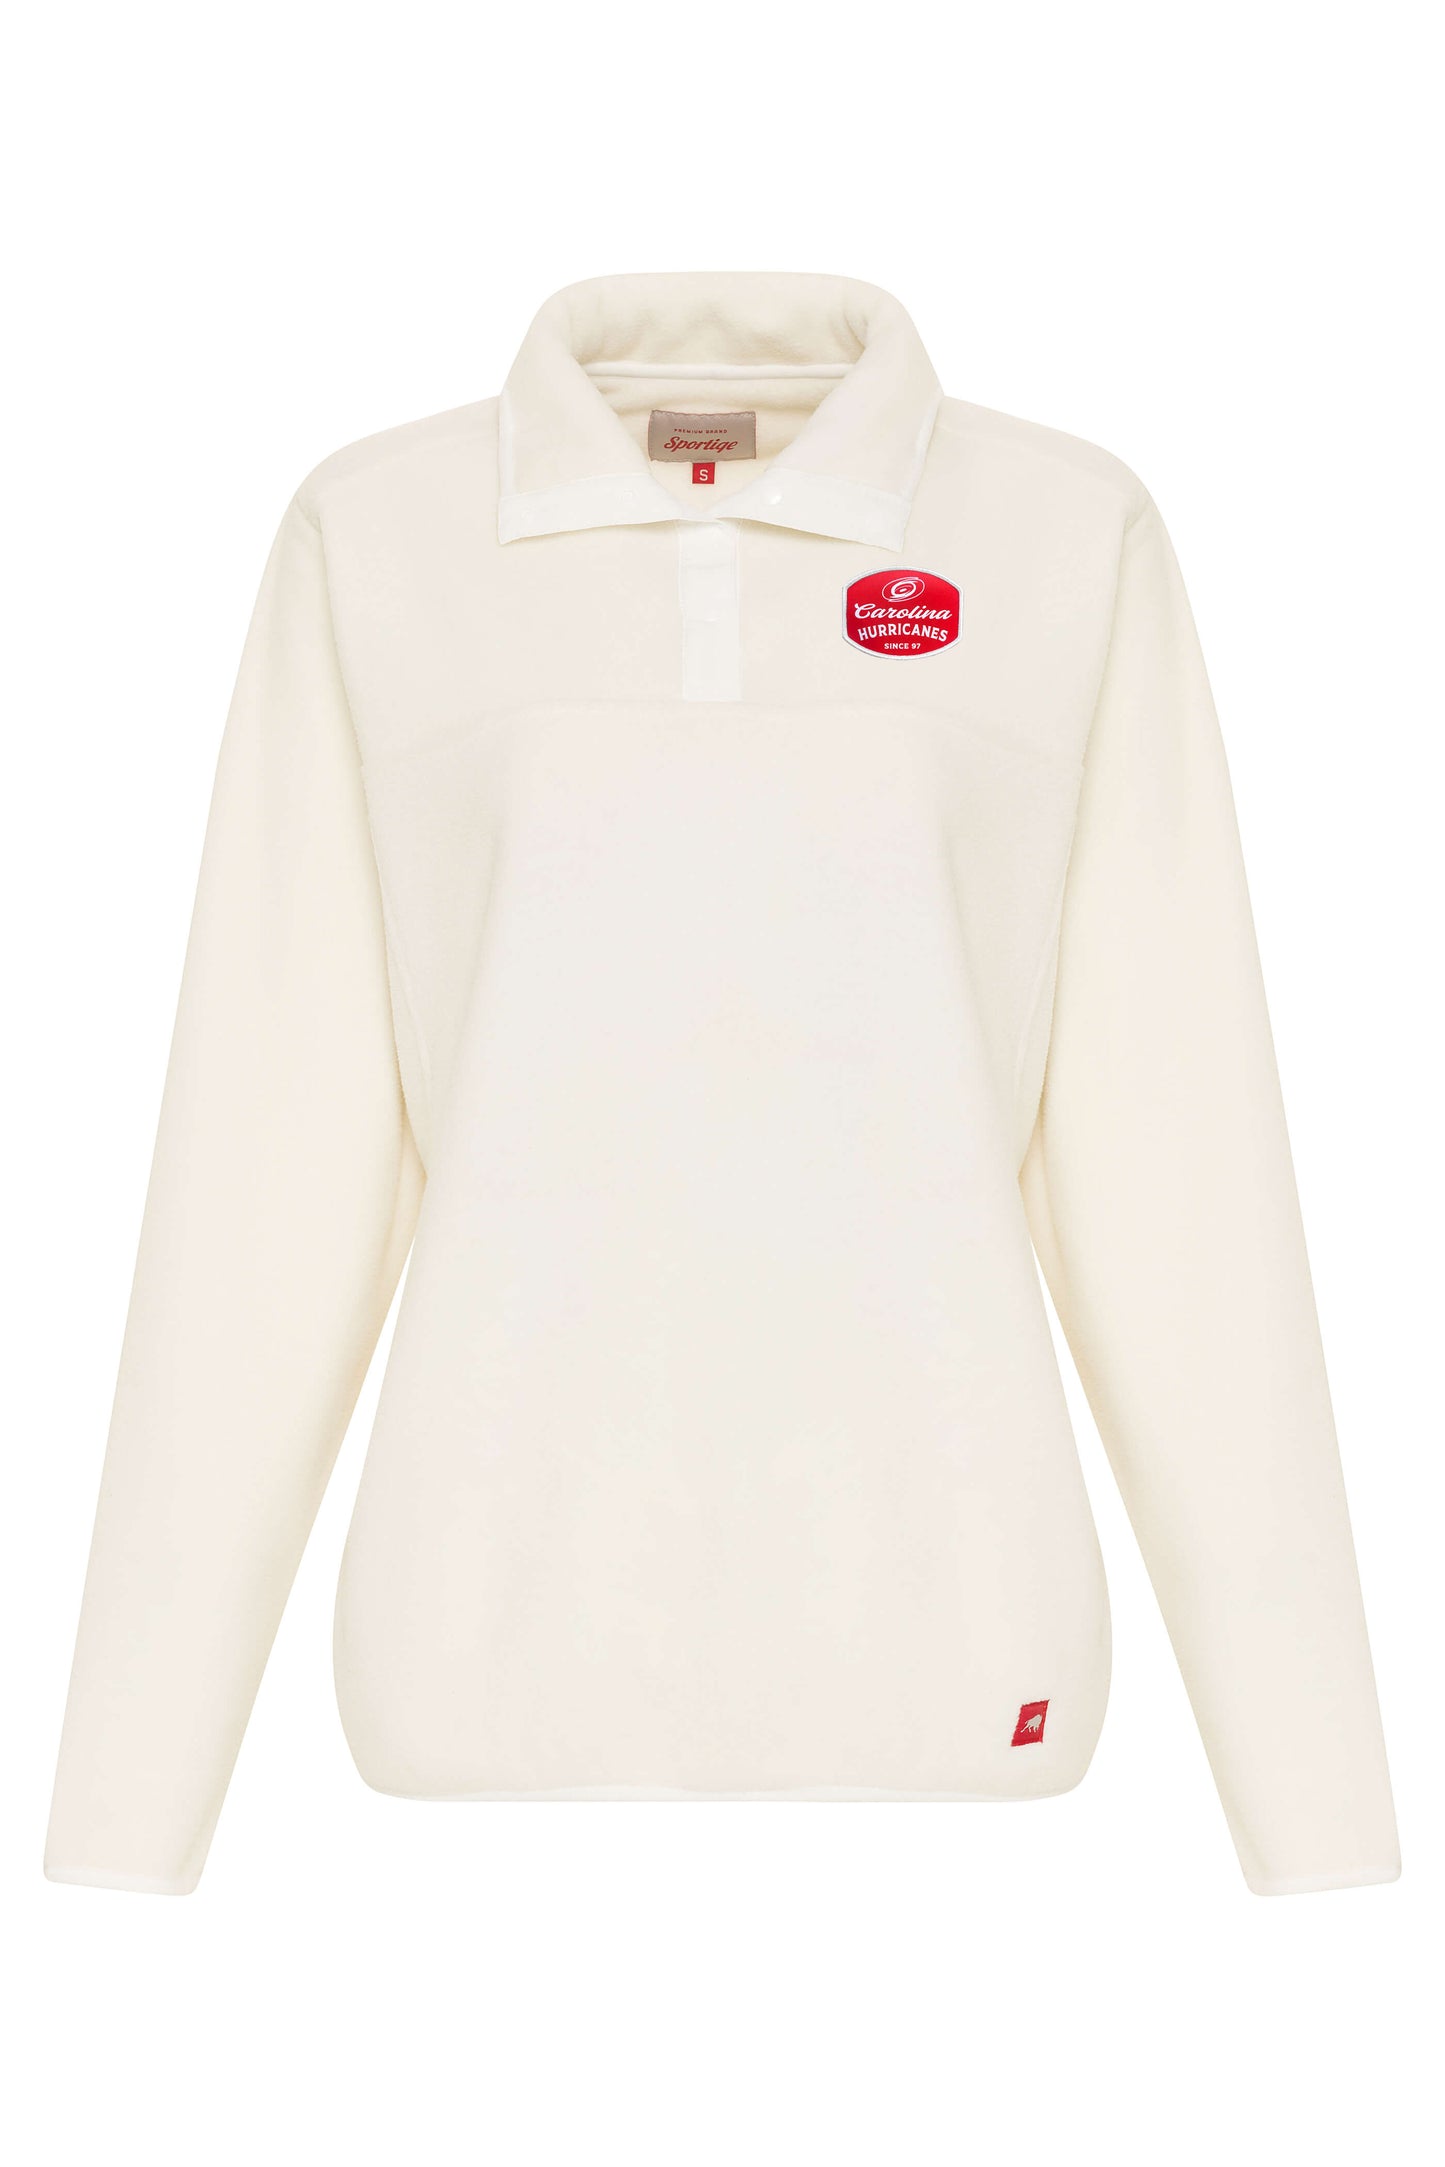 Cream white sweater with button-up collared neck and red Hurricanes graphic patch.